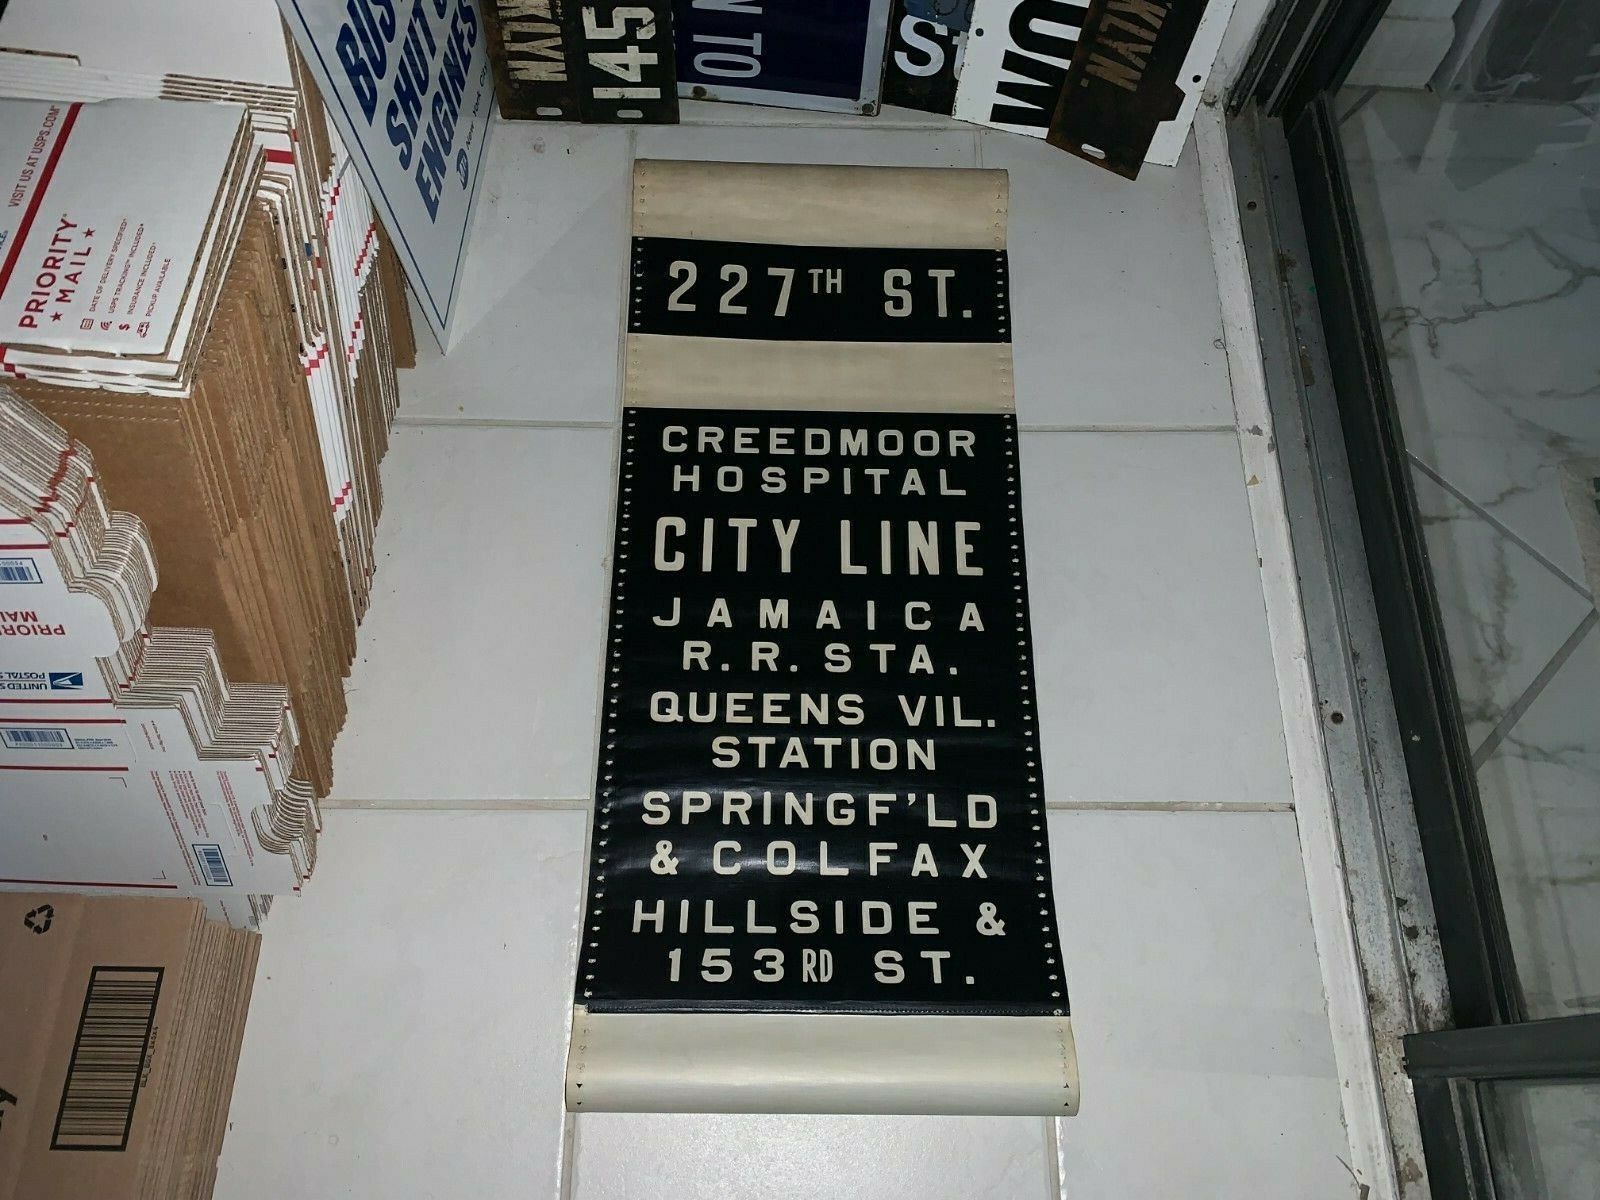 NY NYC HILLSIDE QUEENS BUS ROLL SIGN CREEDMOOR STATE MENTAL PSYCHIATRIC HOSPITAL